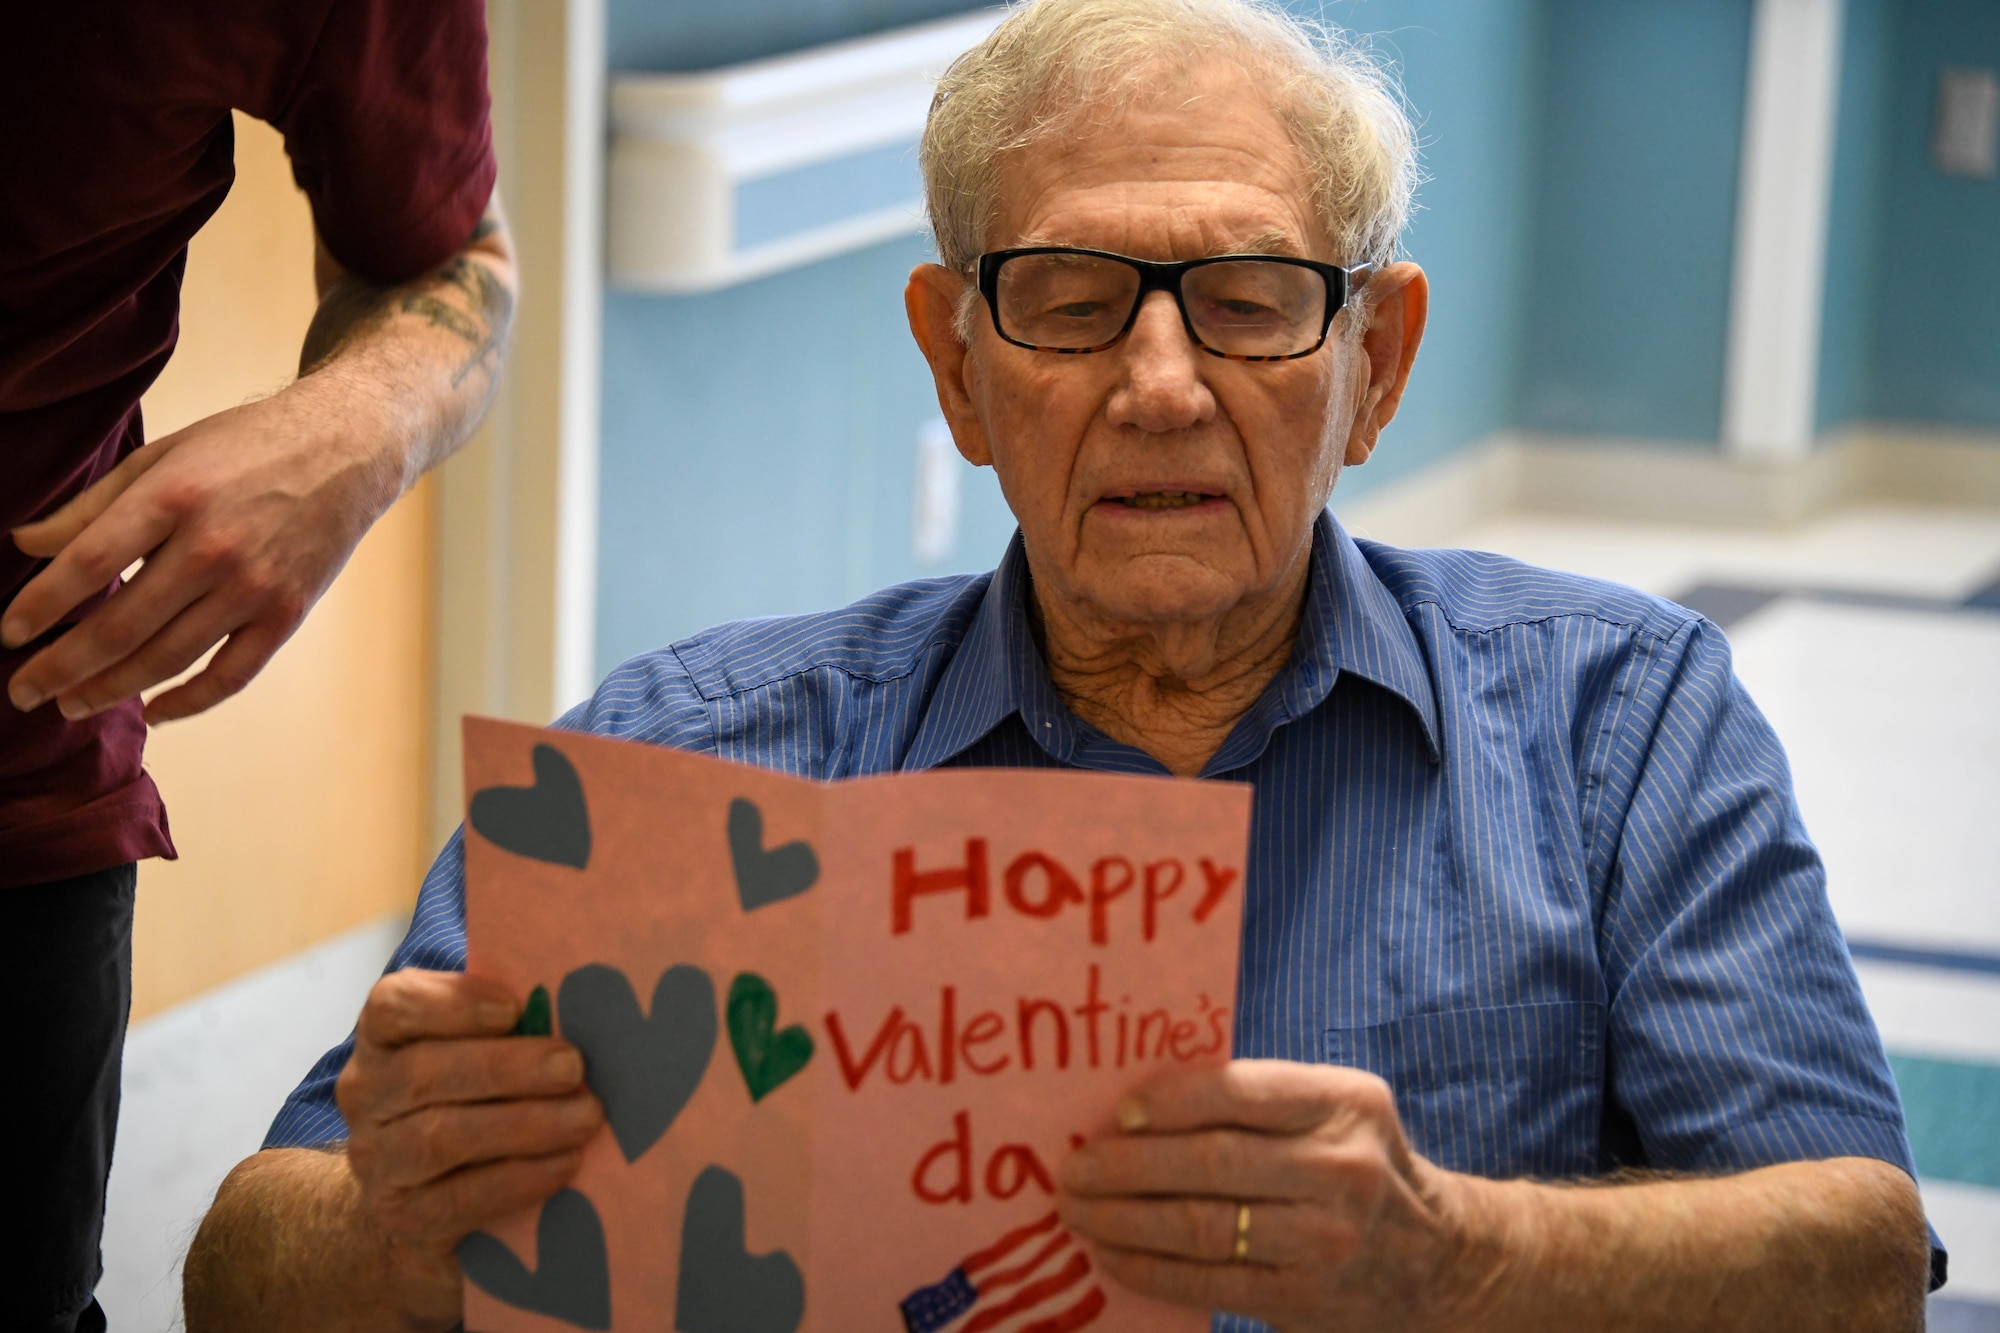 A veteran reads a Valentine’s Day card at the Clinton Veterans Center, Oklahoma, Feb. 14, 2022. Most veterans at this facility served during the Vietnam War, with one 97-year-old resident having served in World War II. (U.S. Air Force photo by Senior Airman Kayla Christenson)